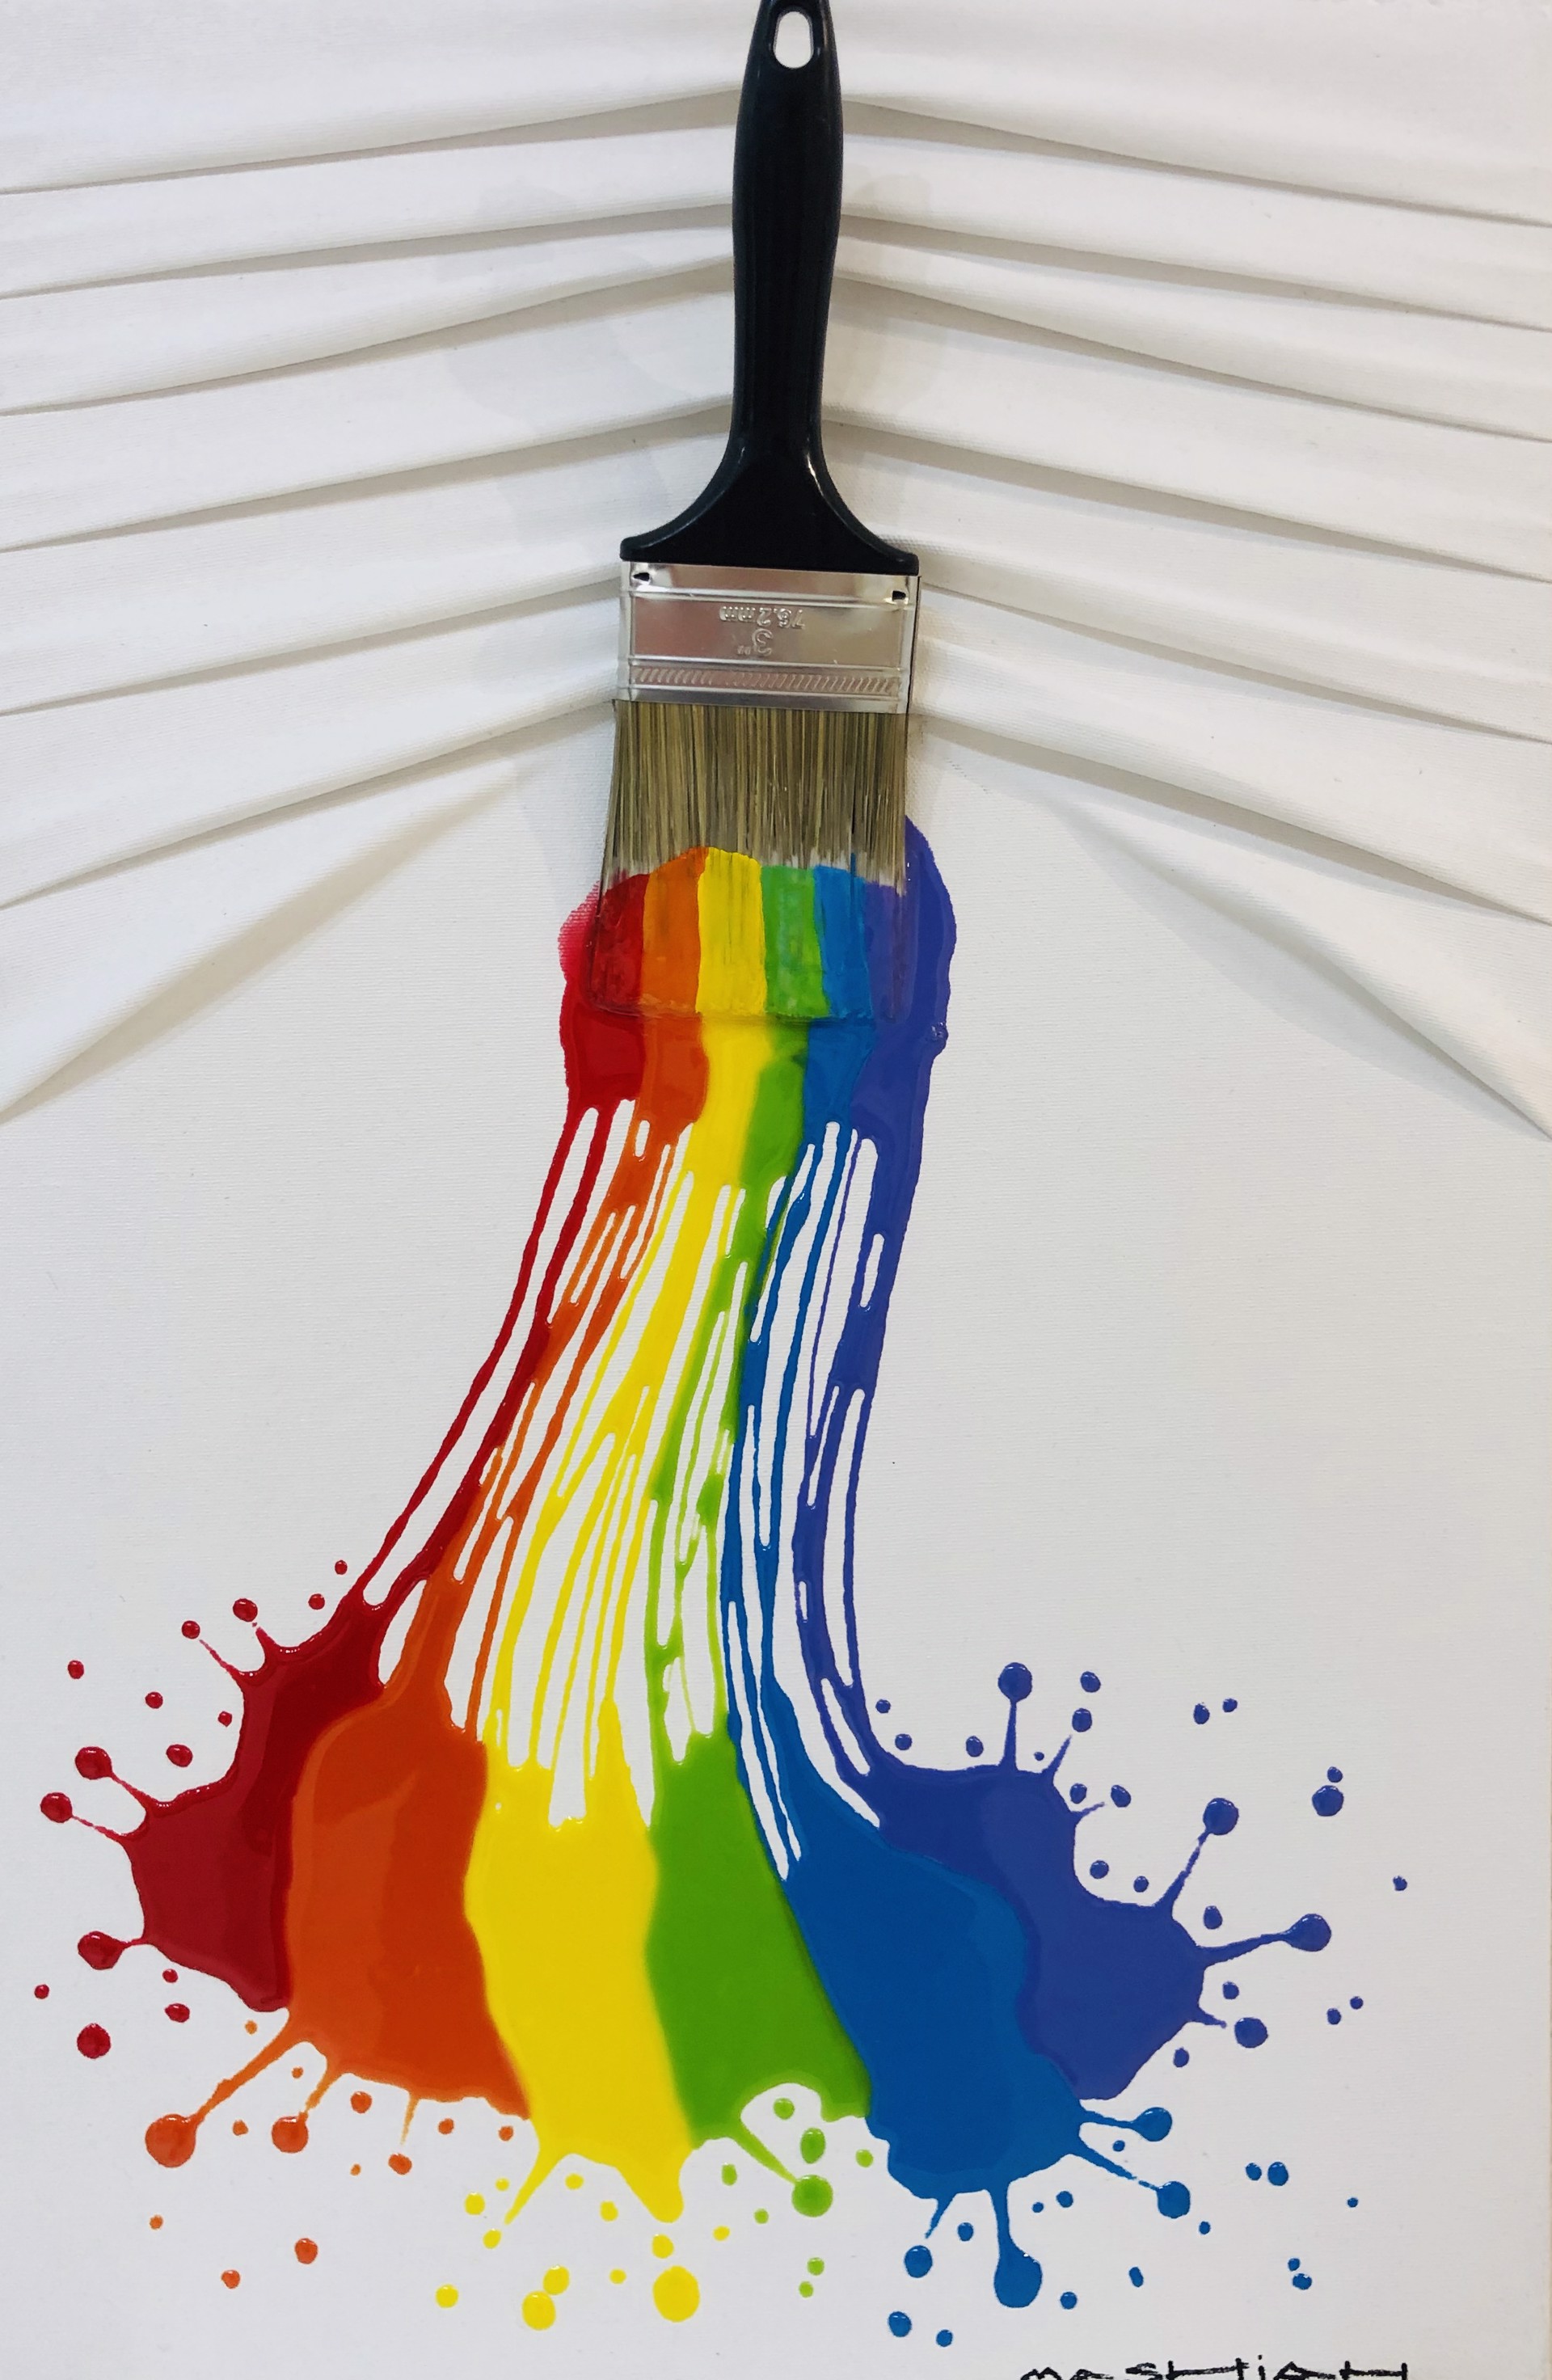  Rainbow Splash on White Small Board by Brushes and Rollers "Let's Paint" by Efi Mashiah